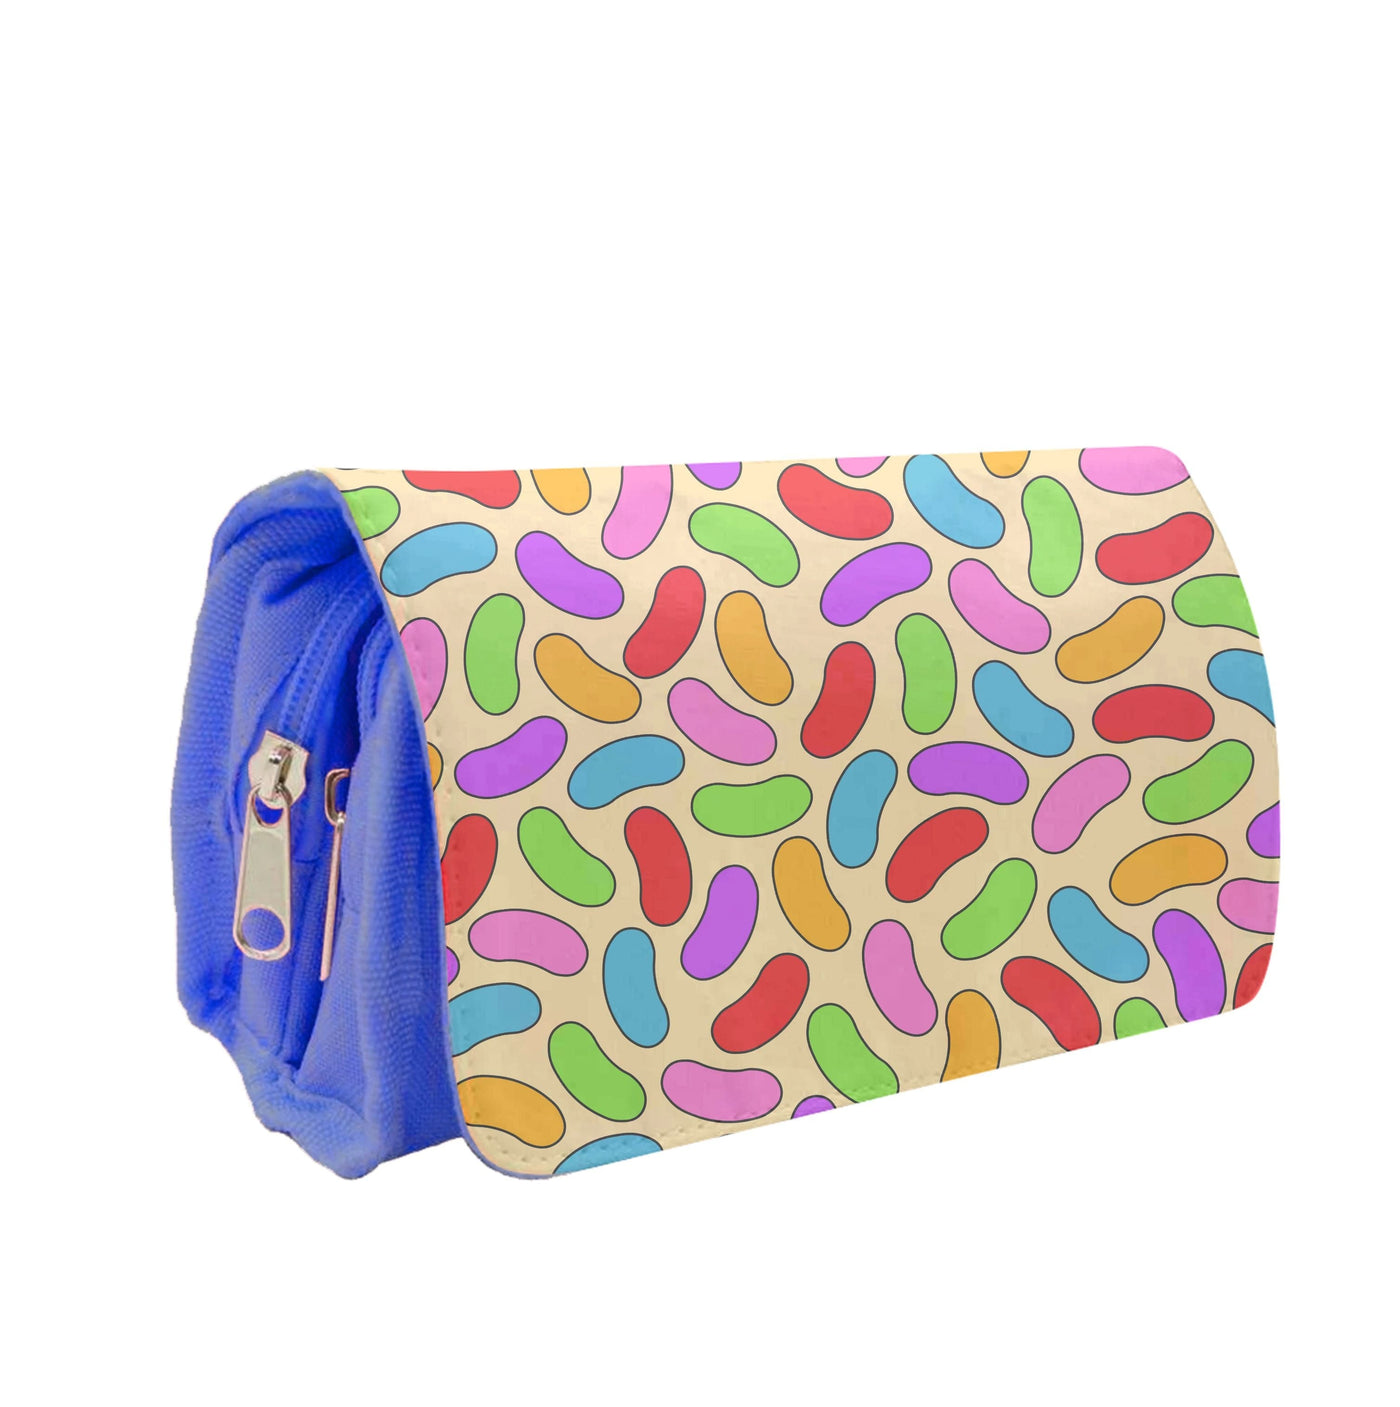 Jelly Beans - Sweets Patterns Pencil Case